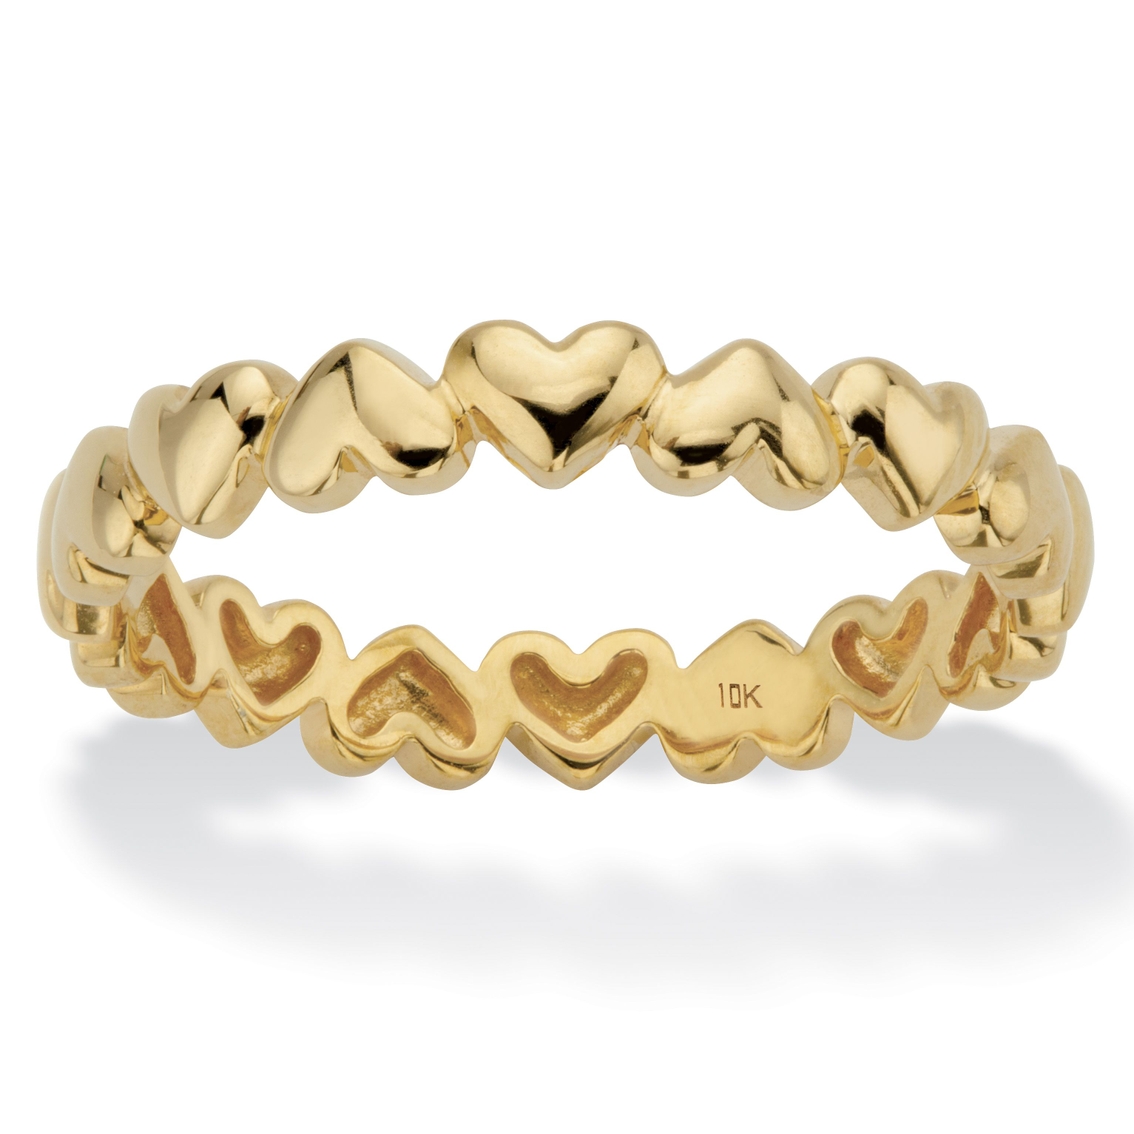 Polished Heart-Link Eternity Ring in Solid 10k Yellow Gold - Image 1 of 5